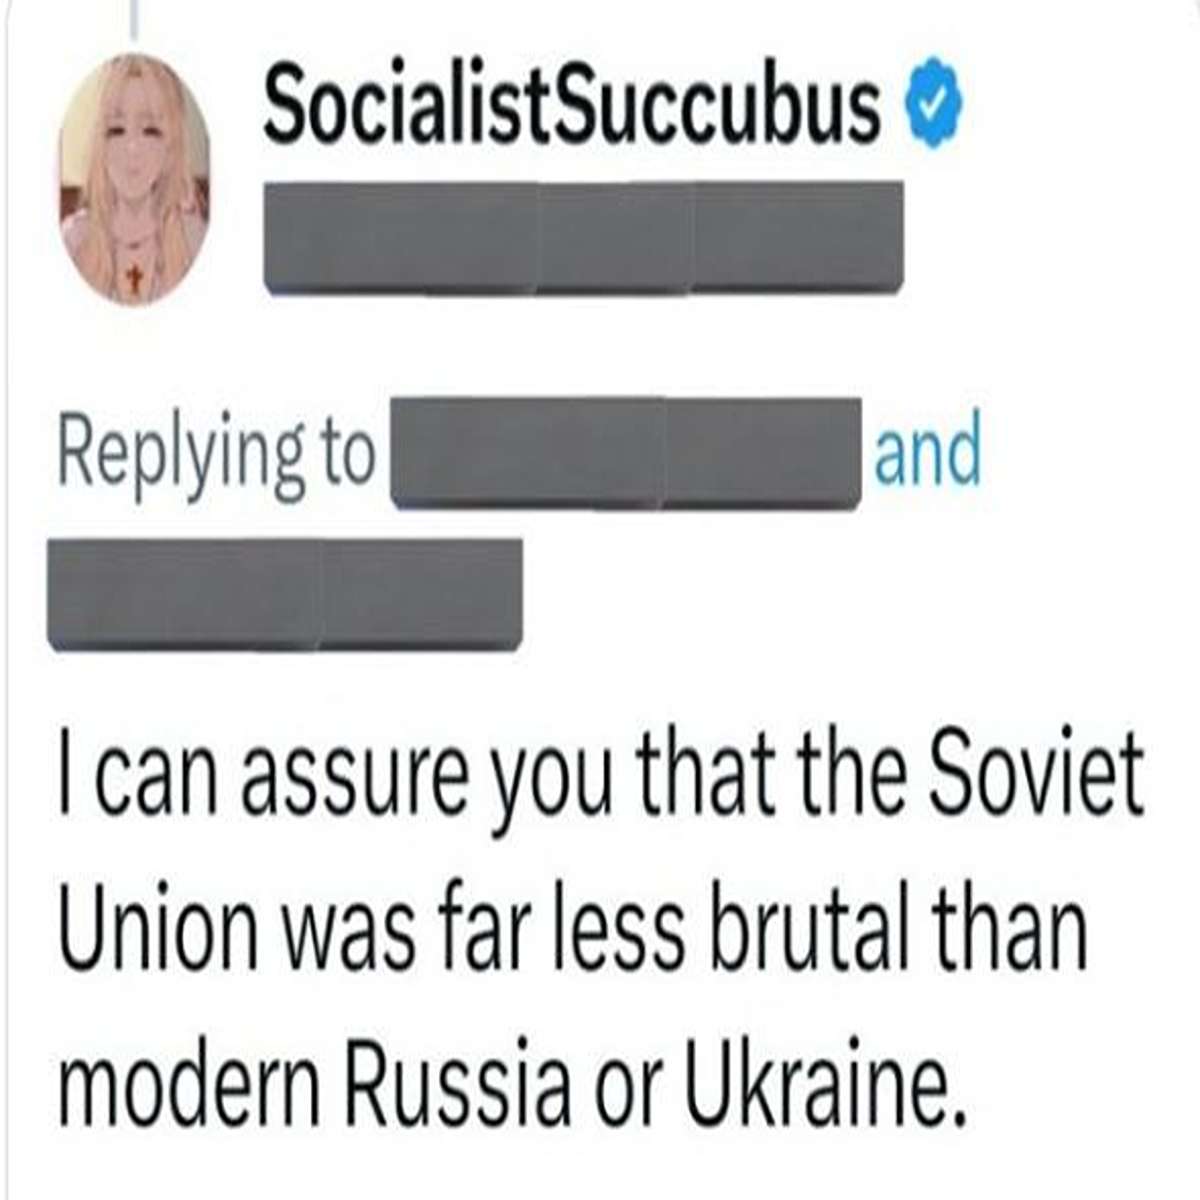 delusional people - smoking bumper stickers - SocialistSuccubus and can assure you that the Soviet Union was far less brutal than modern Russia or Ukraine.